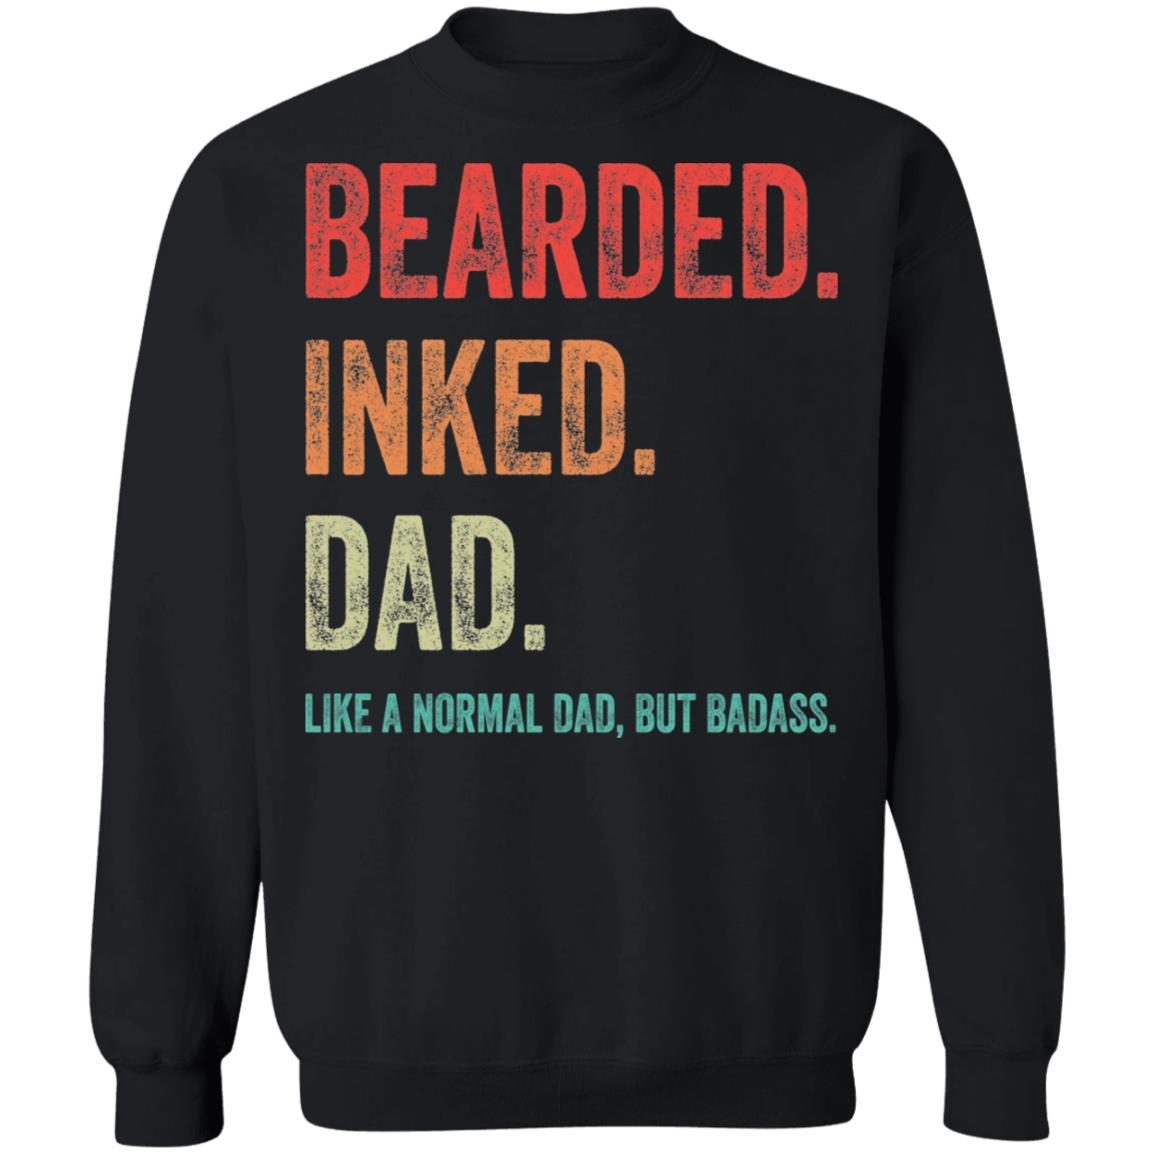 Bearded inked Dad like a normal dad but Badass shirt